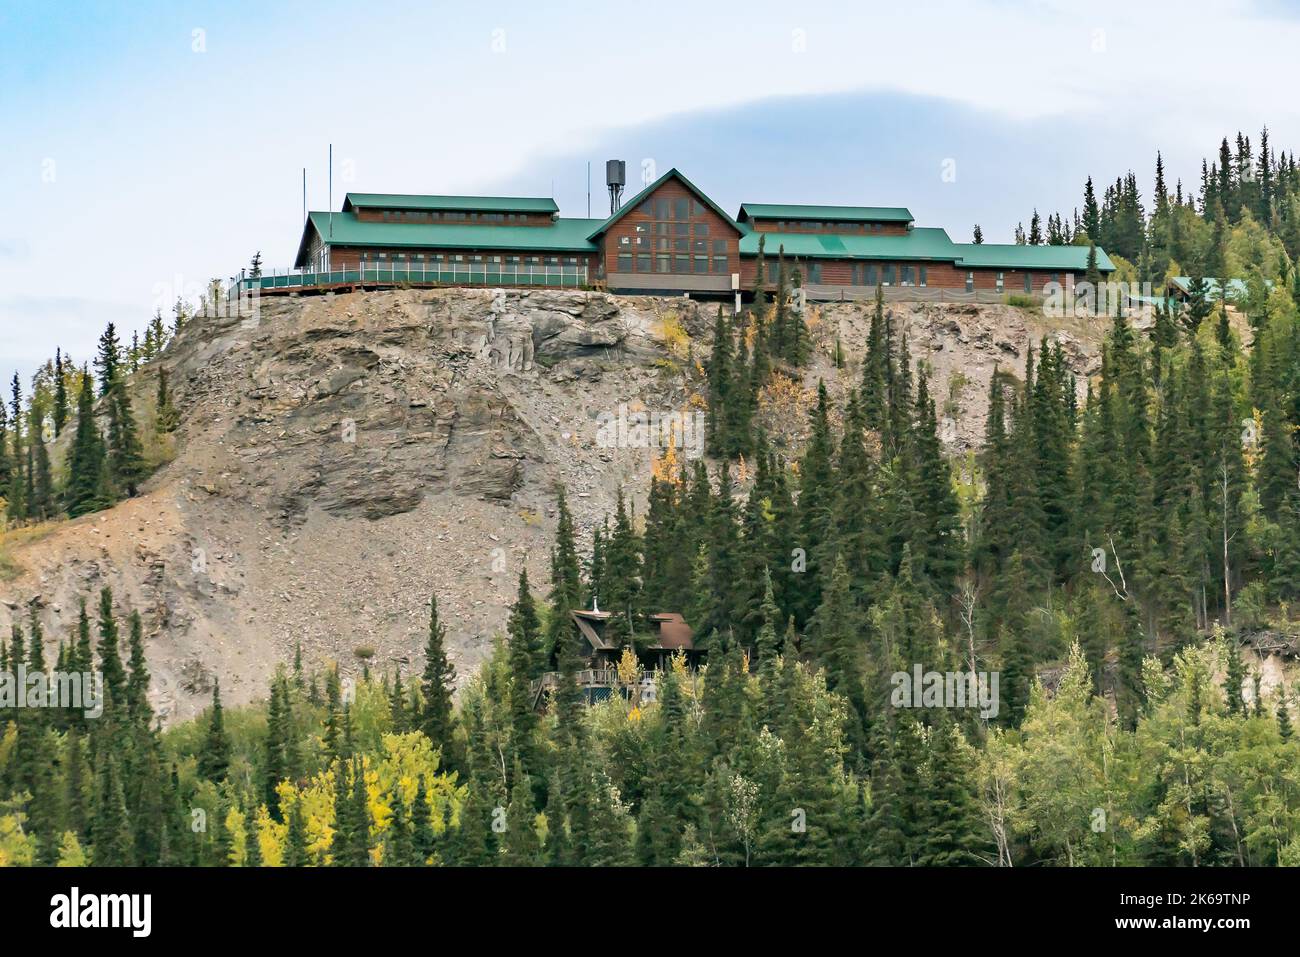 Denali Village, Alaska - August 31, 2022: The Grande Denali Lodge perched on the hillside of the Nenana River has some of the best views of the valley Stock Photo